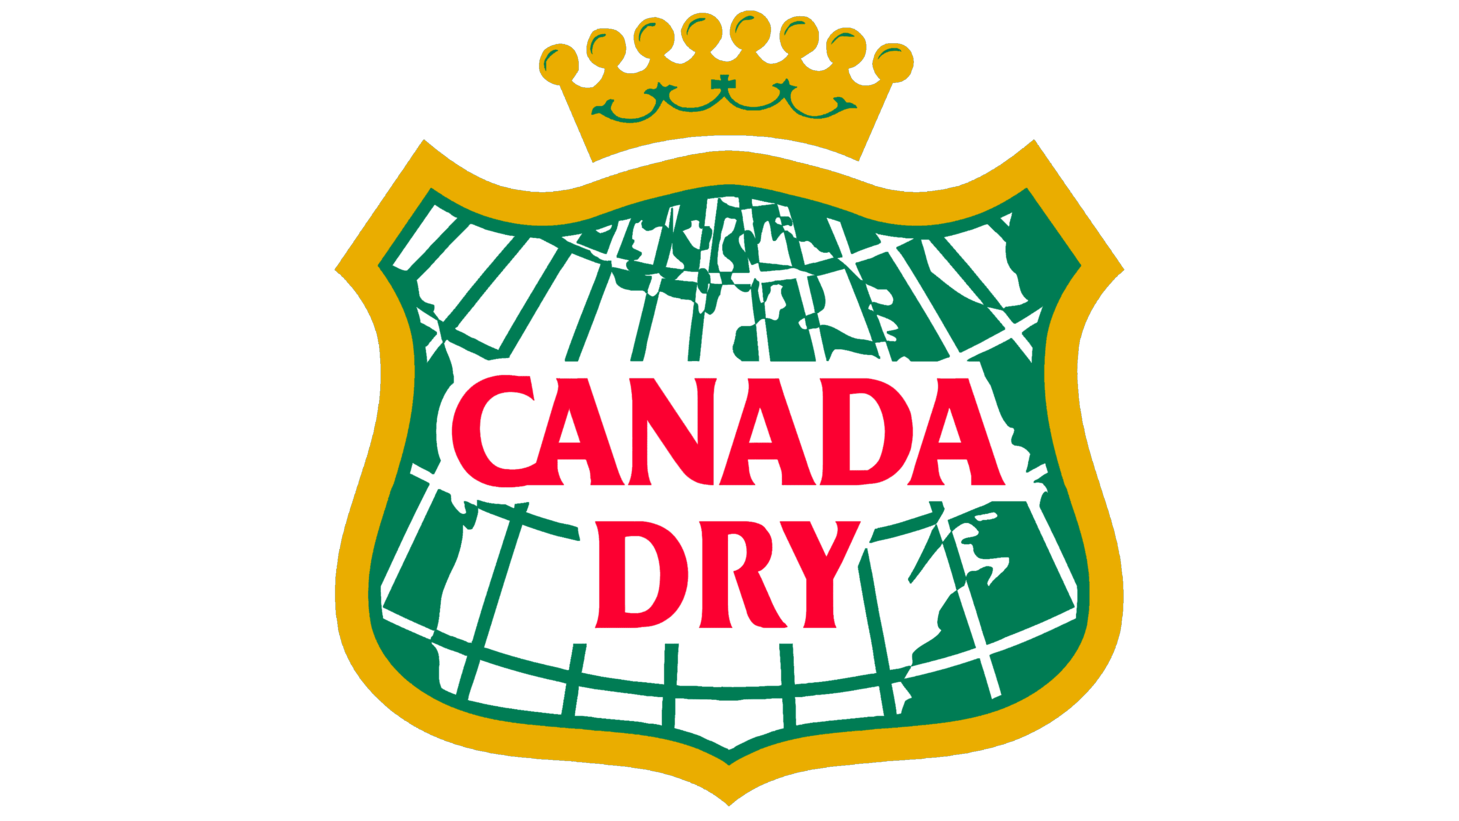 Canada dry sign 1904